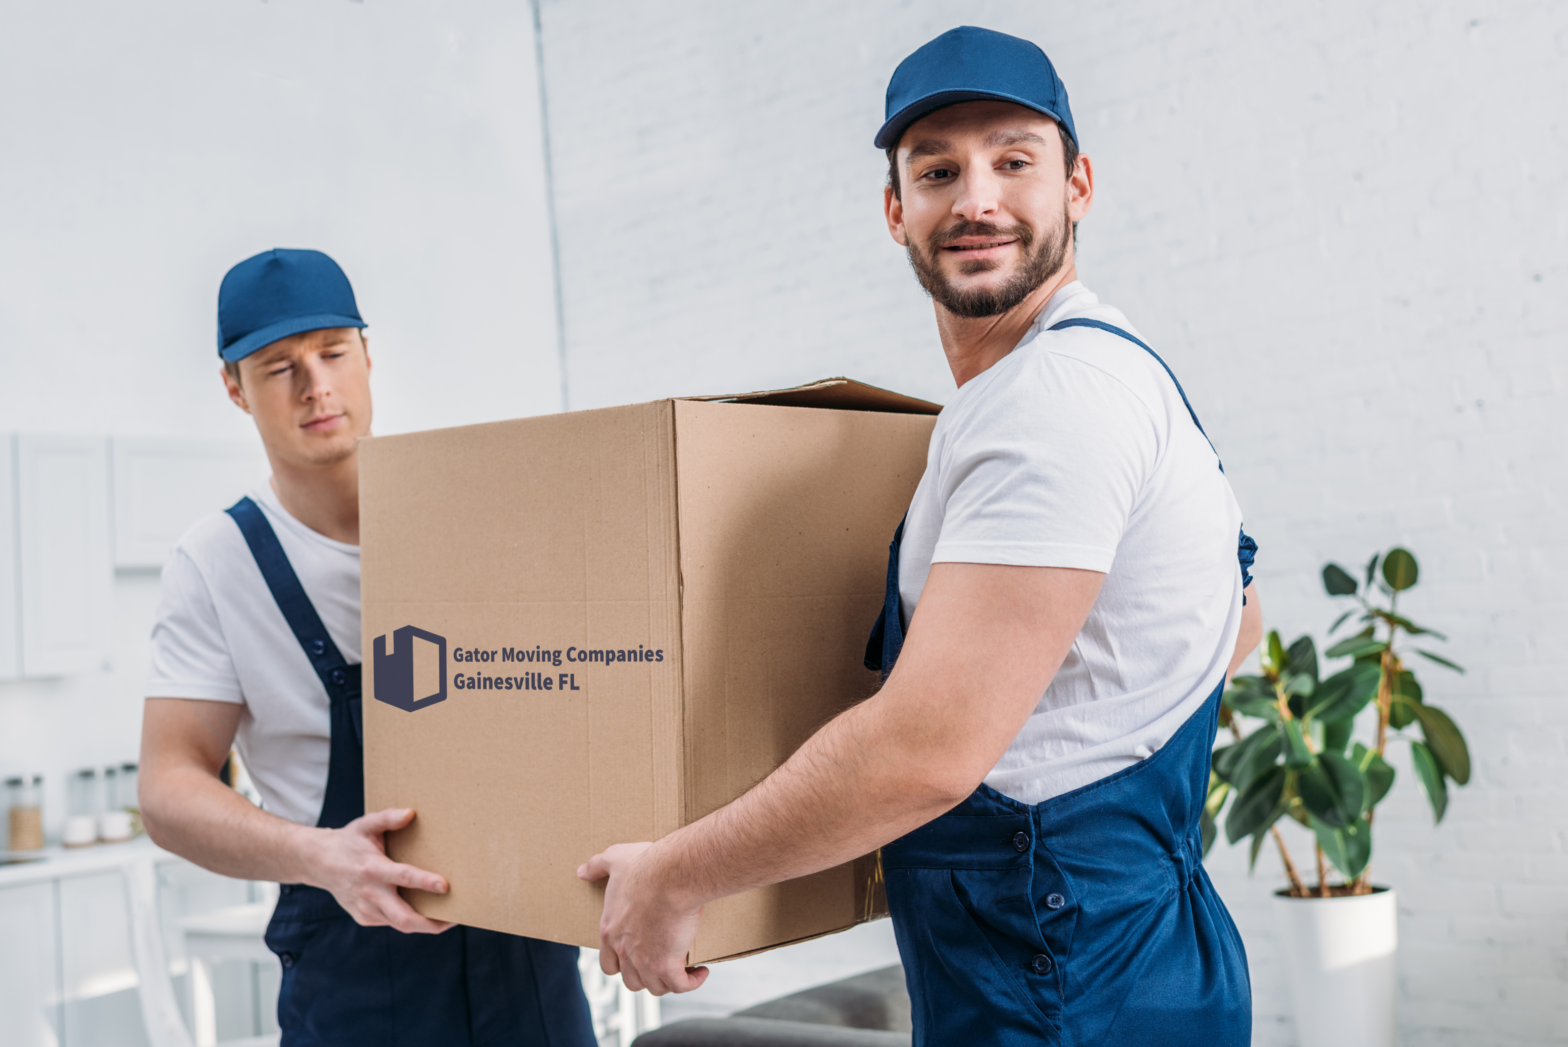 gainesville moving companies